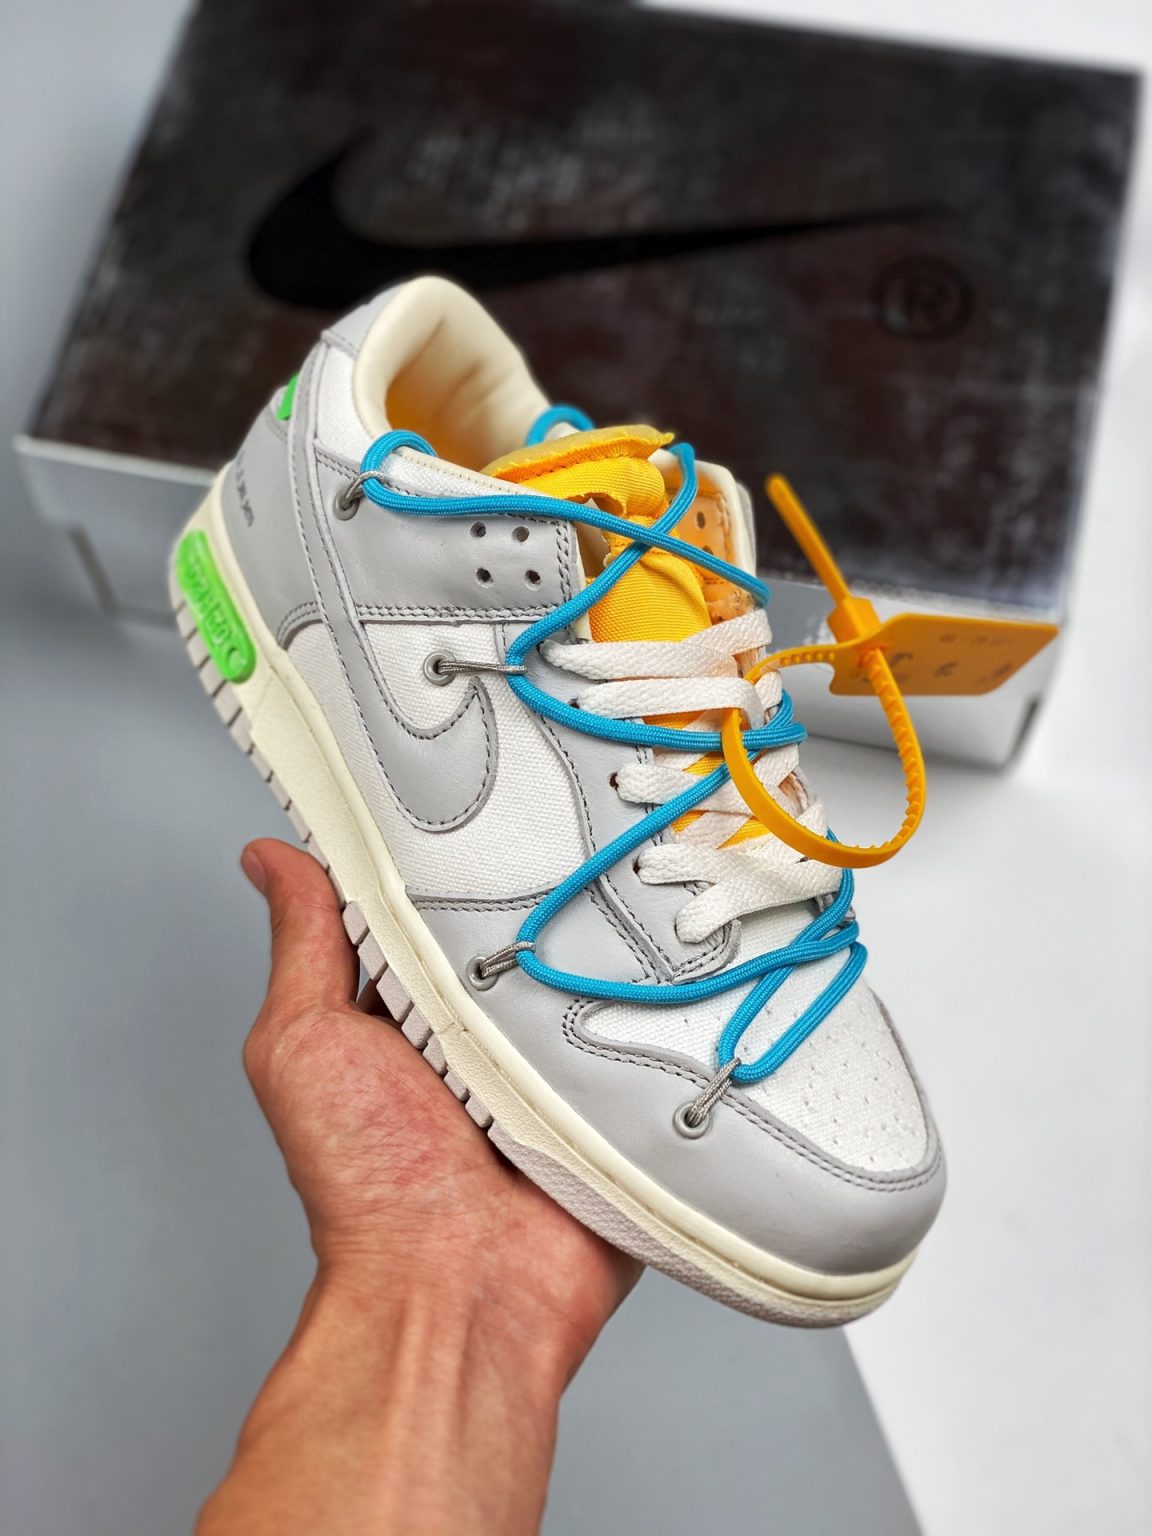 Off-White x Nike Dunk Low “02 To 50” Sail Grey Yellow For Sale ...